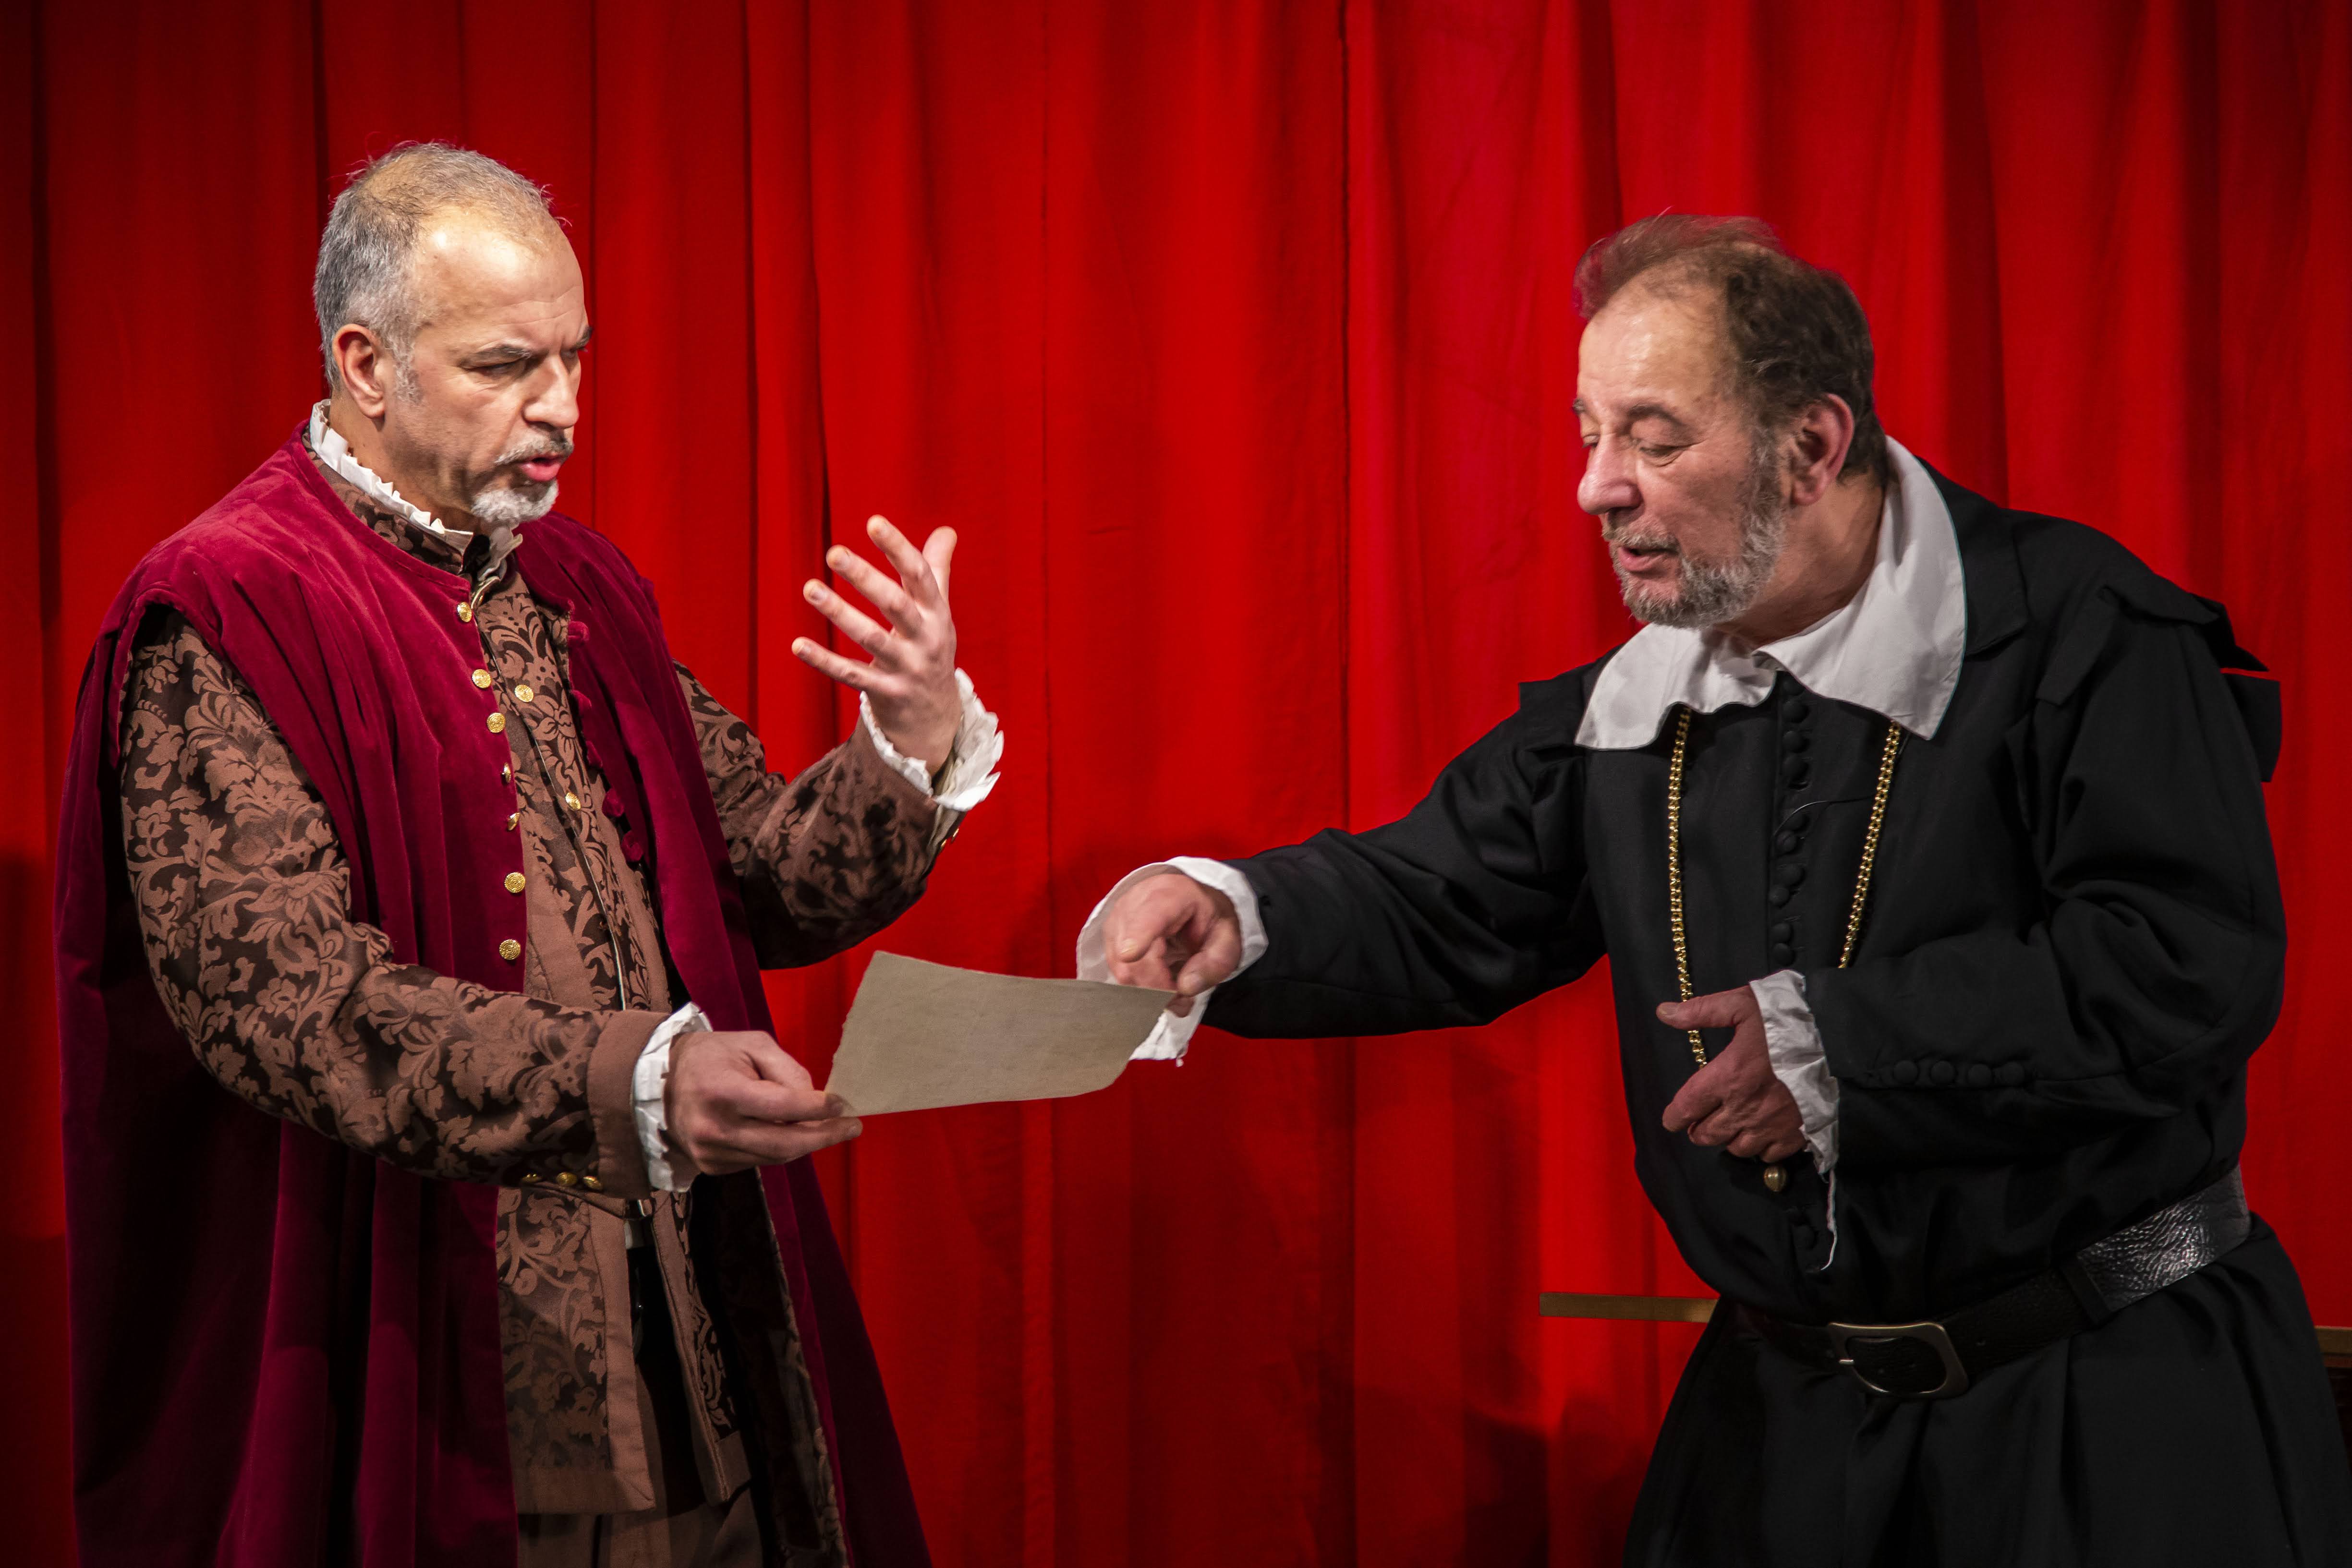 The partner Museo Galileo organises a theatrical performance